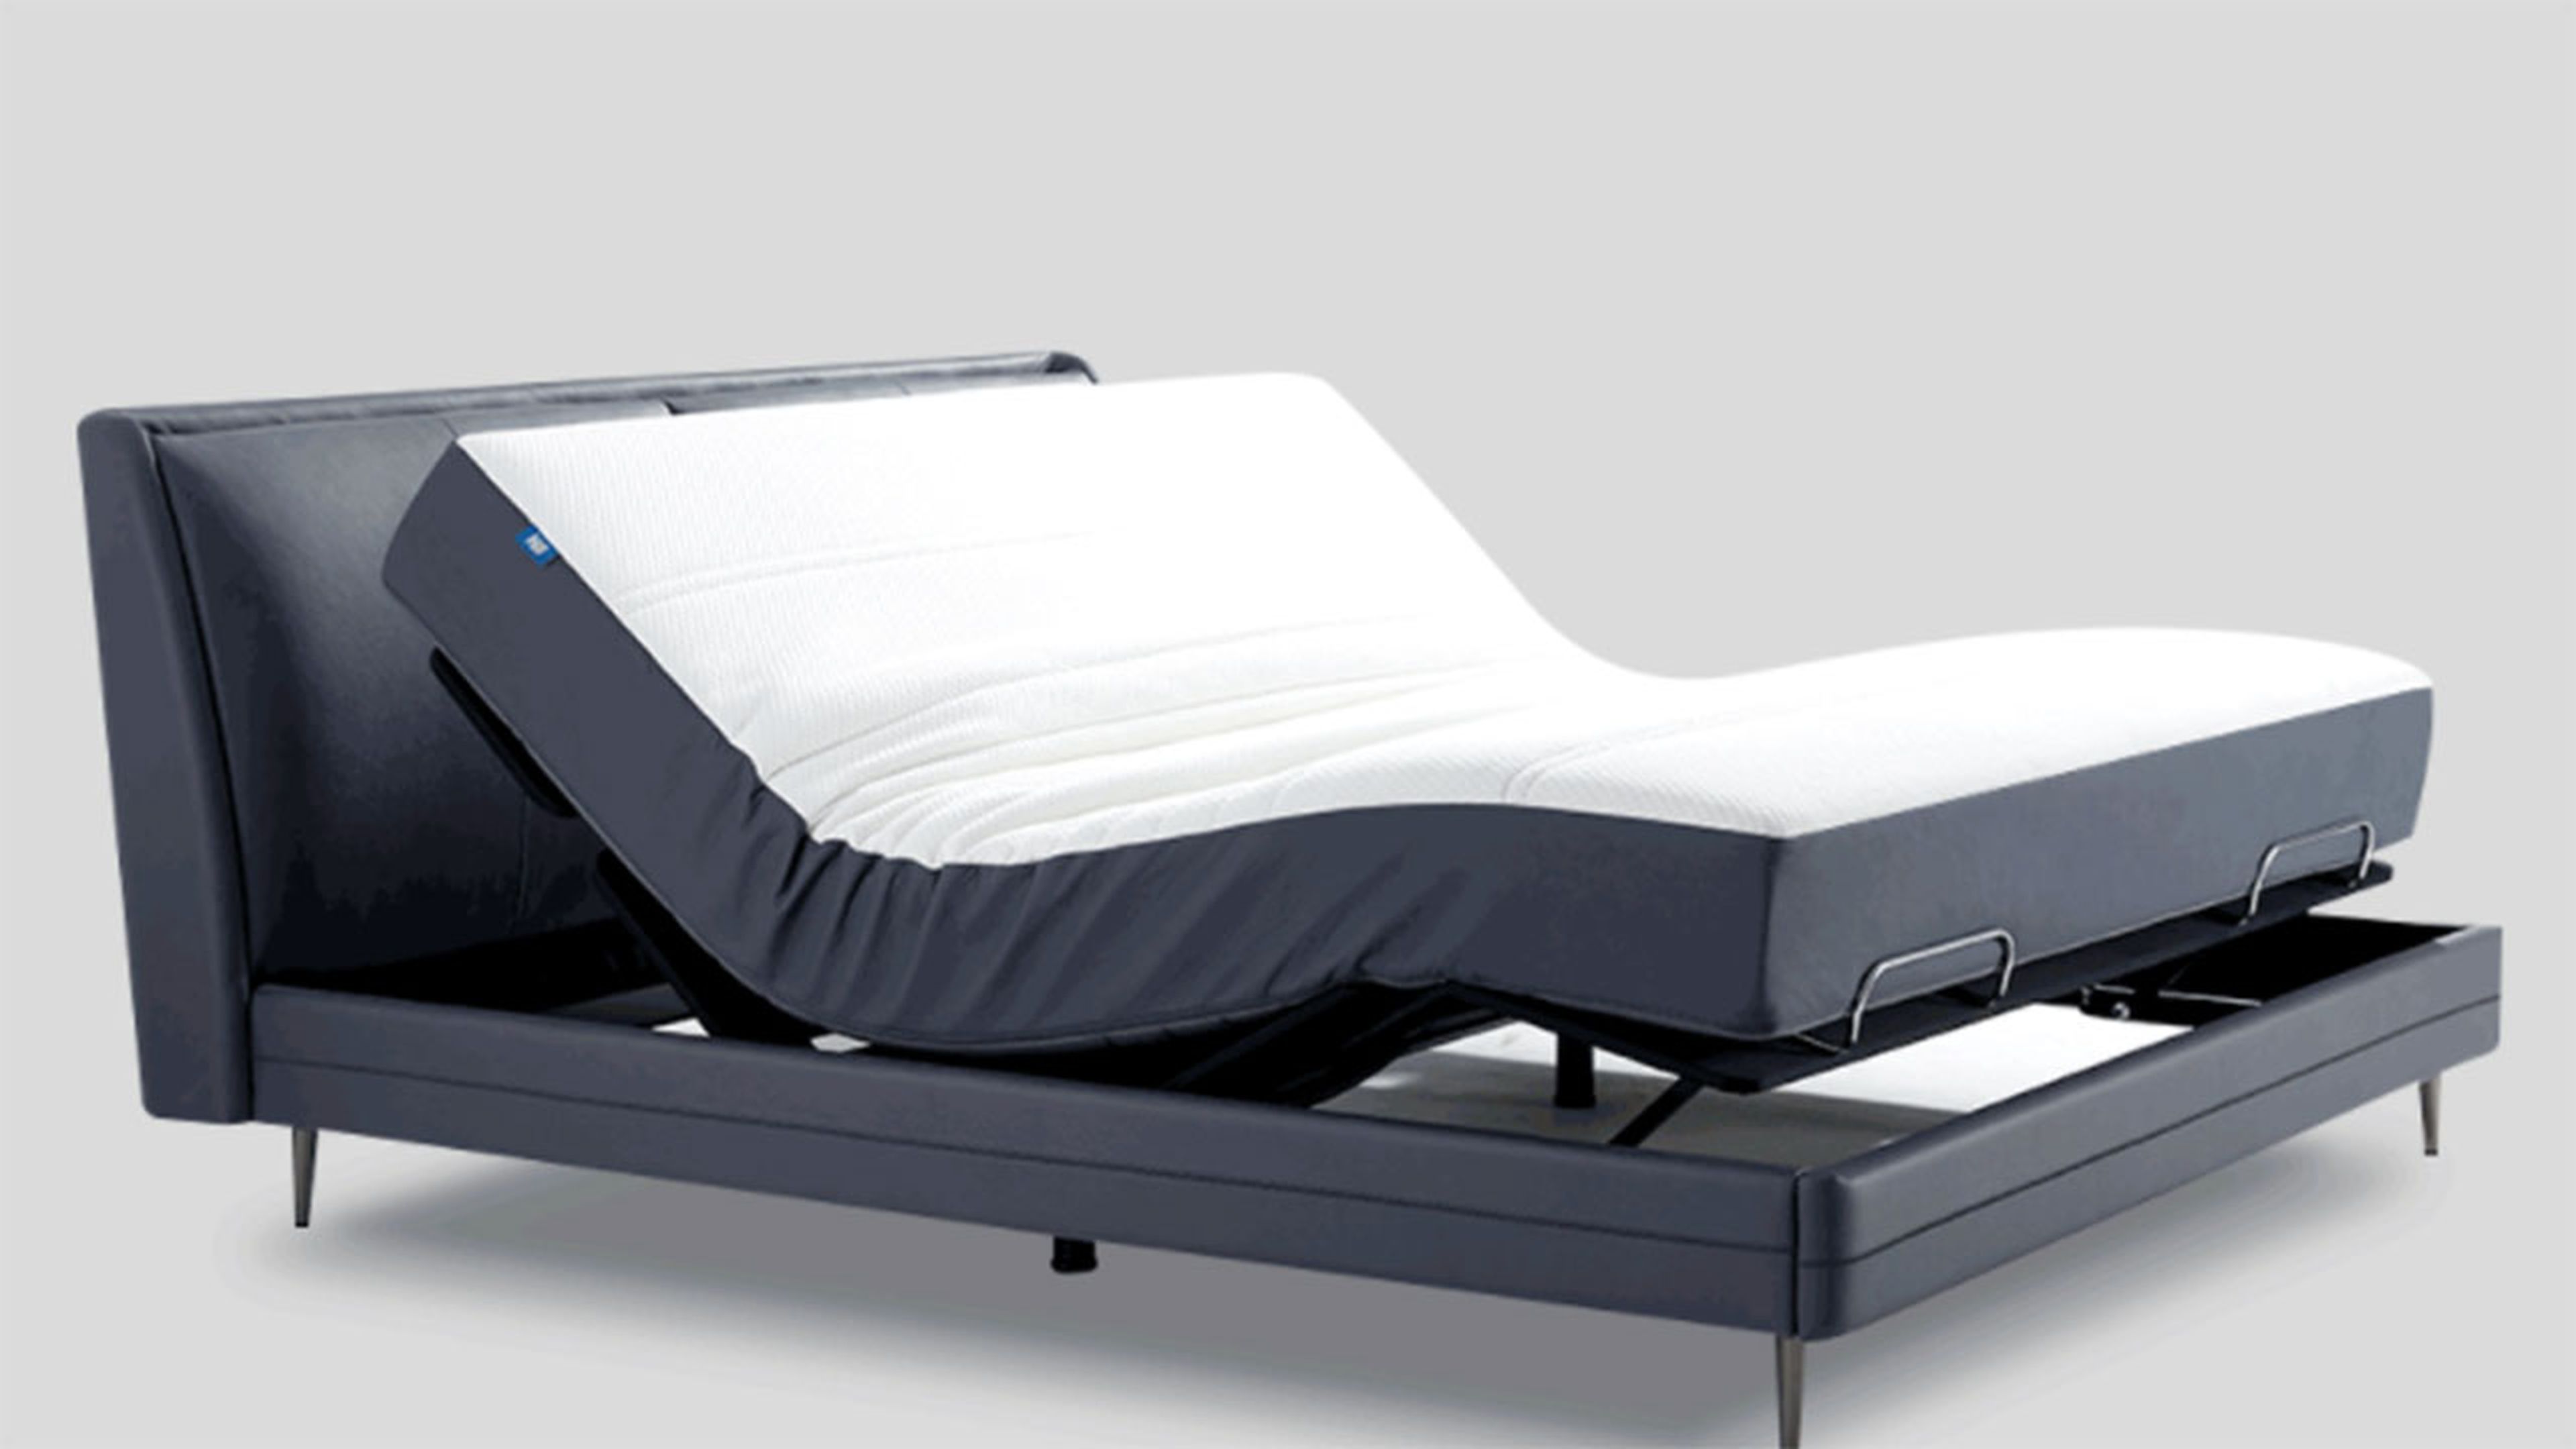 Xiaomi Smart Electric Bed Pro